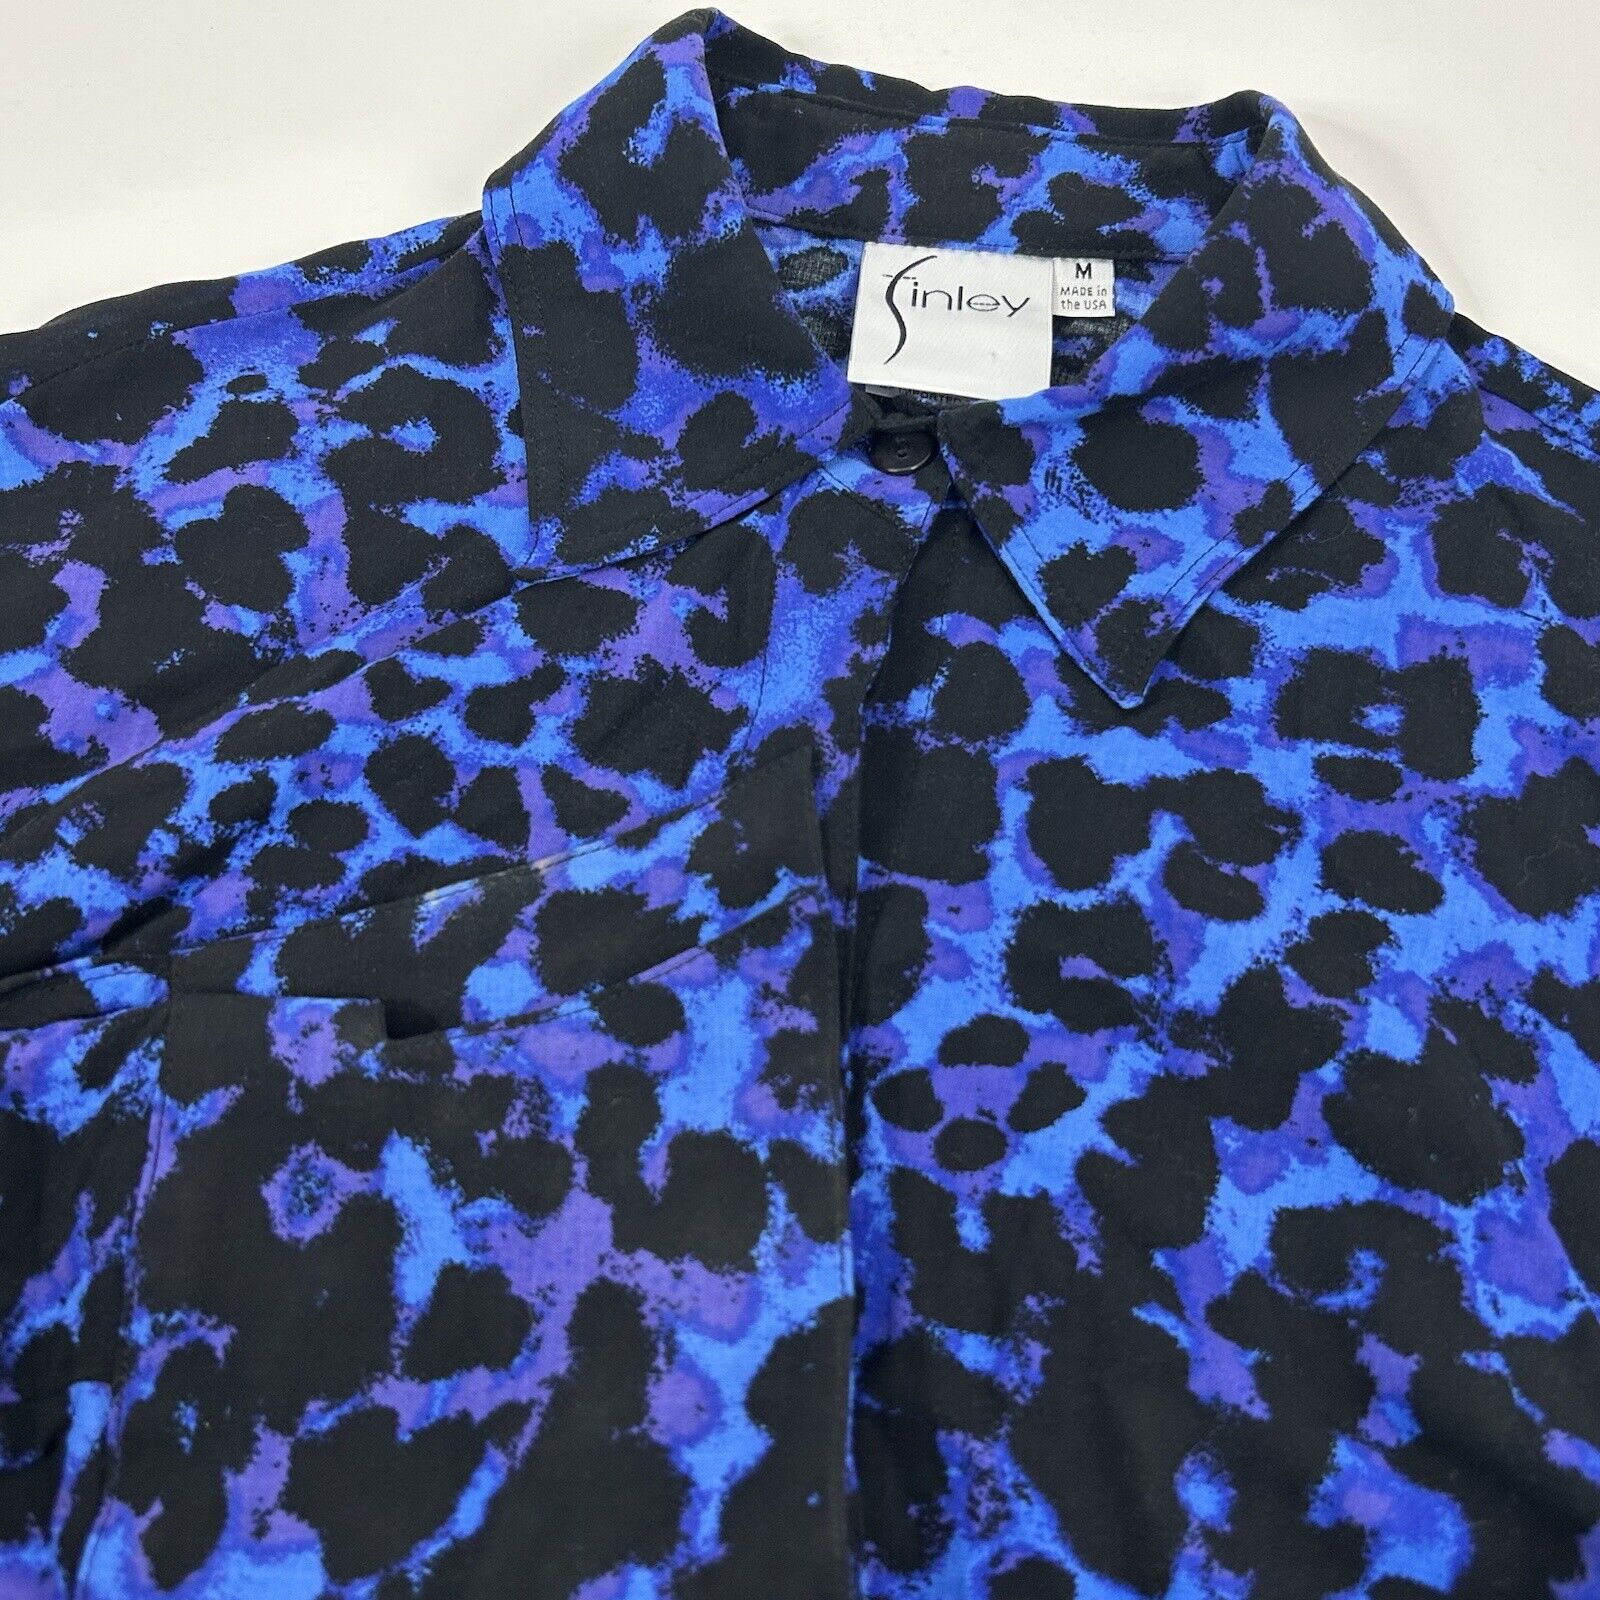 Finley Blouse Size Medium Long Sleeve Blue Leopard Made in USA